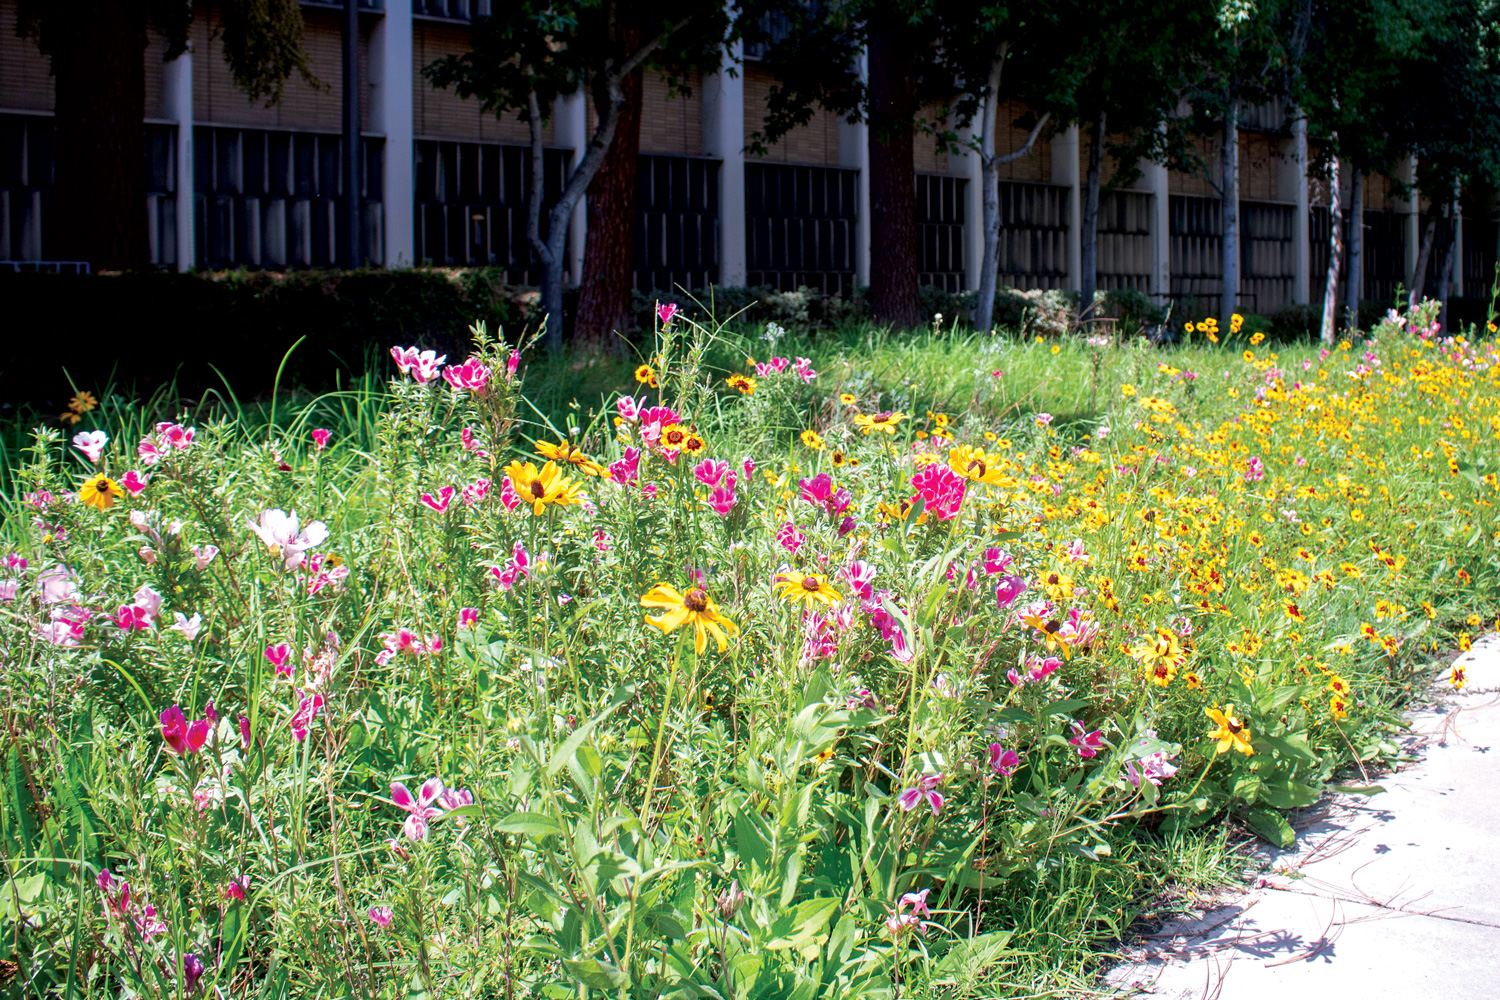 flowers and drought-tolerant grass grow between sidewalk and building